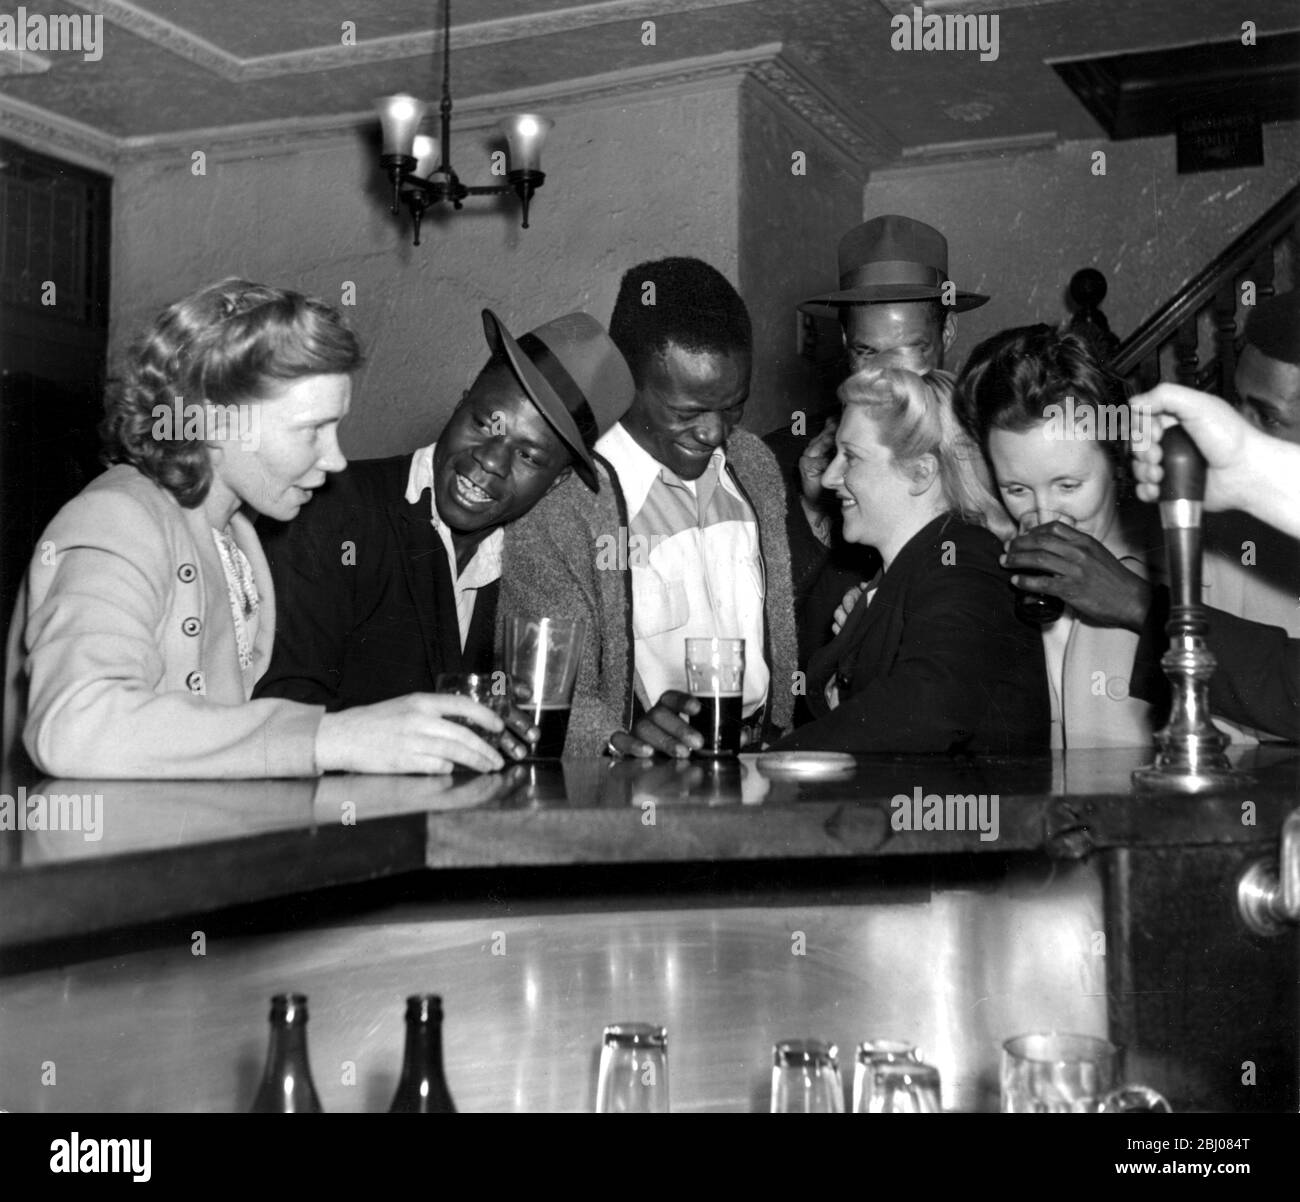 Scenes in the 'Roebuck' public house Tottenham Court Road. The pub is known as the Jungle Arms. The publican encourages patronage of African and Jamaican customers - September 1949 - Original caption Stock Photo